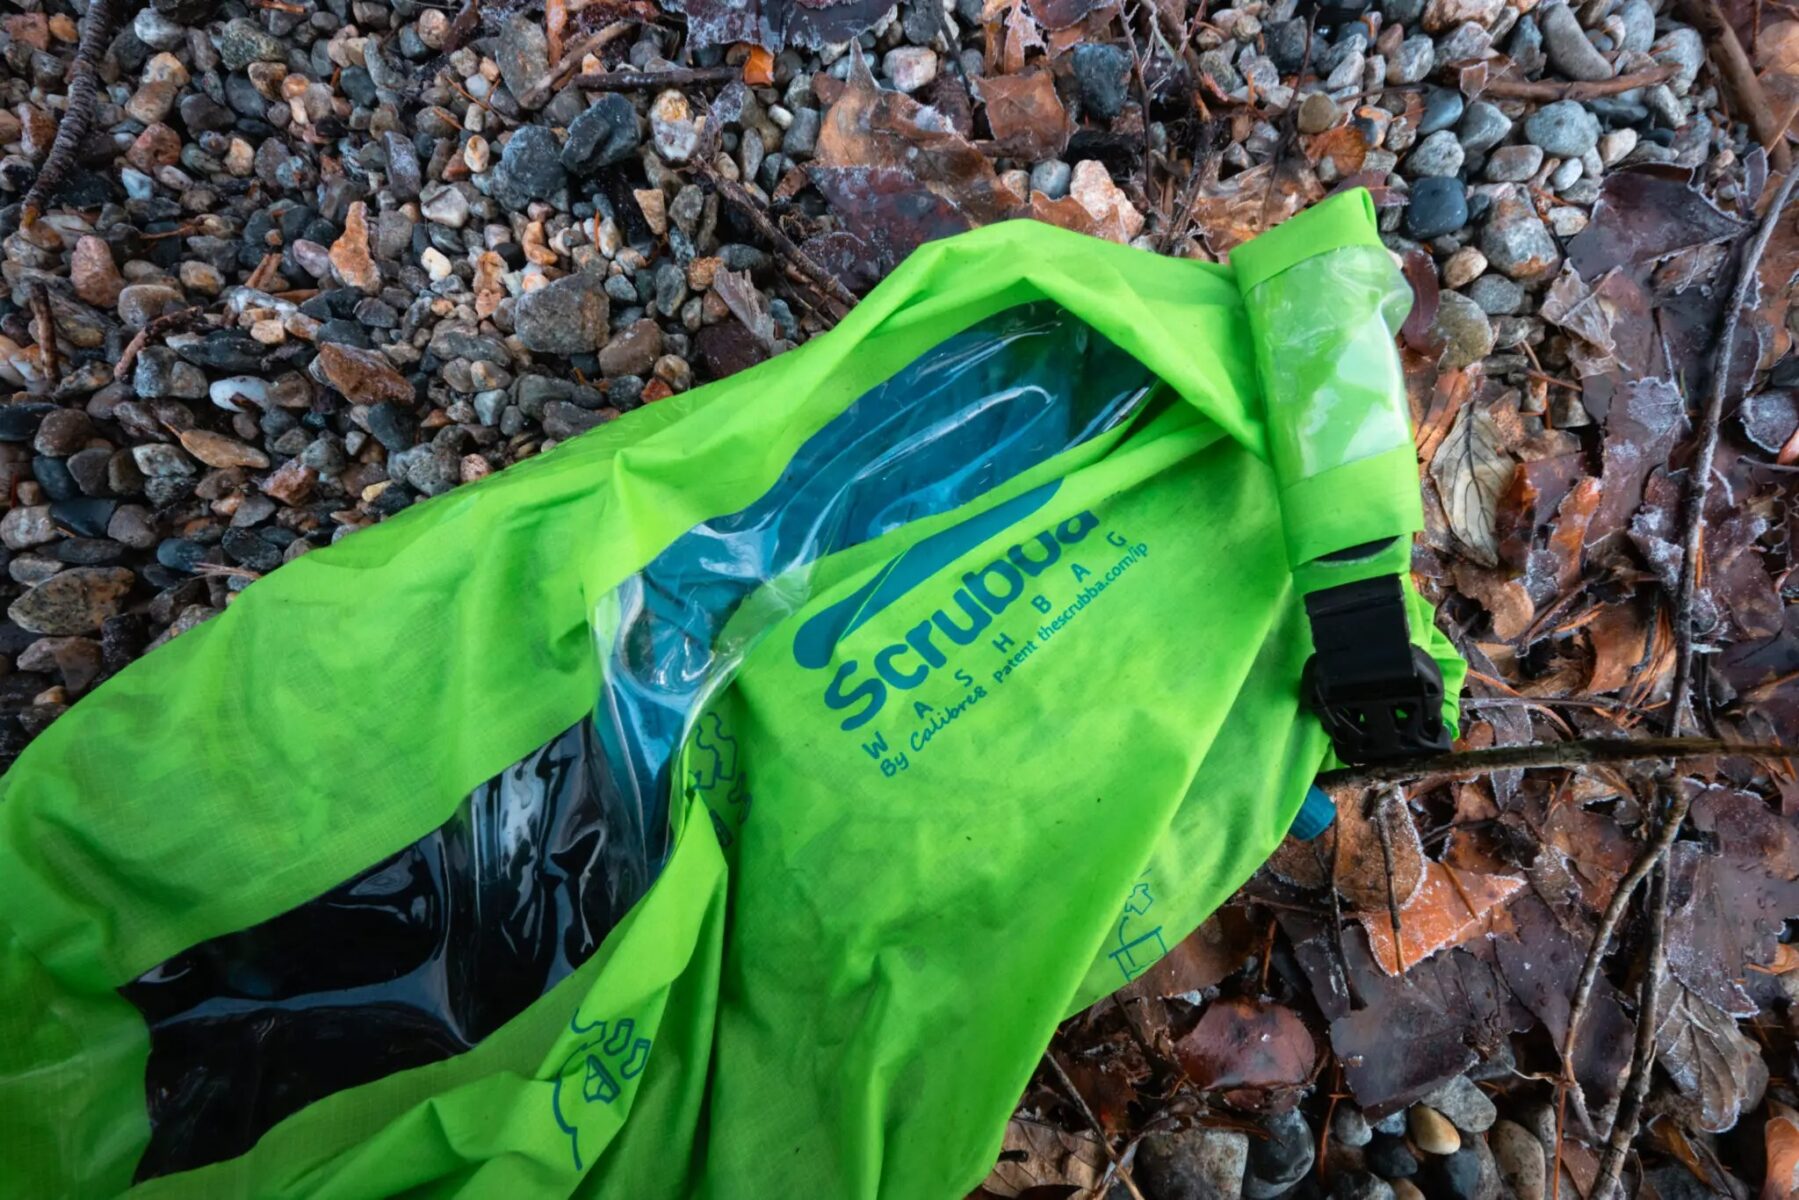 The Washing Machine in Your Suitcase: A Review of the Scrubba Washbag